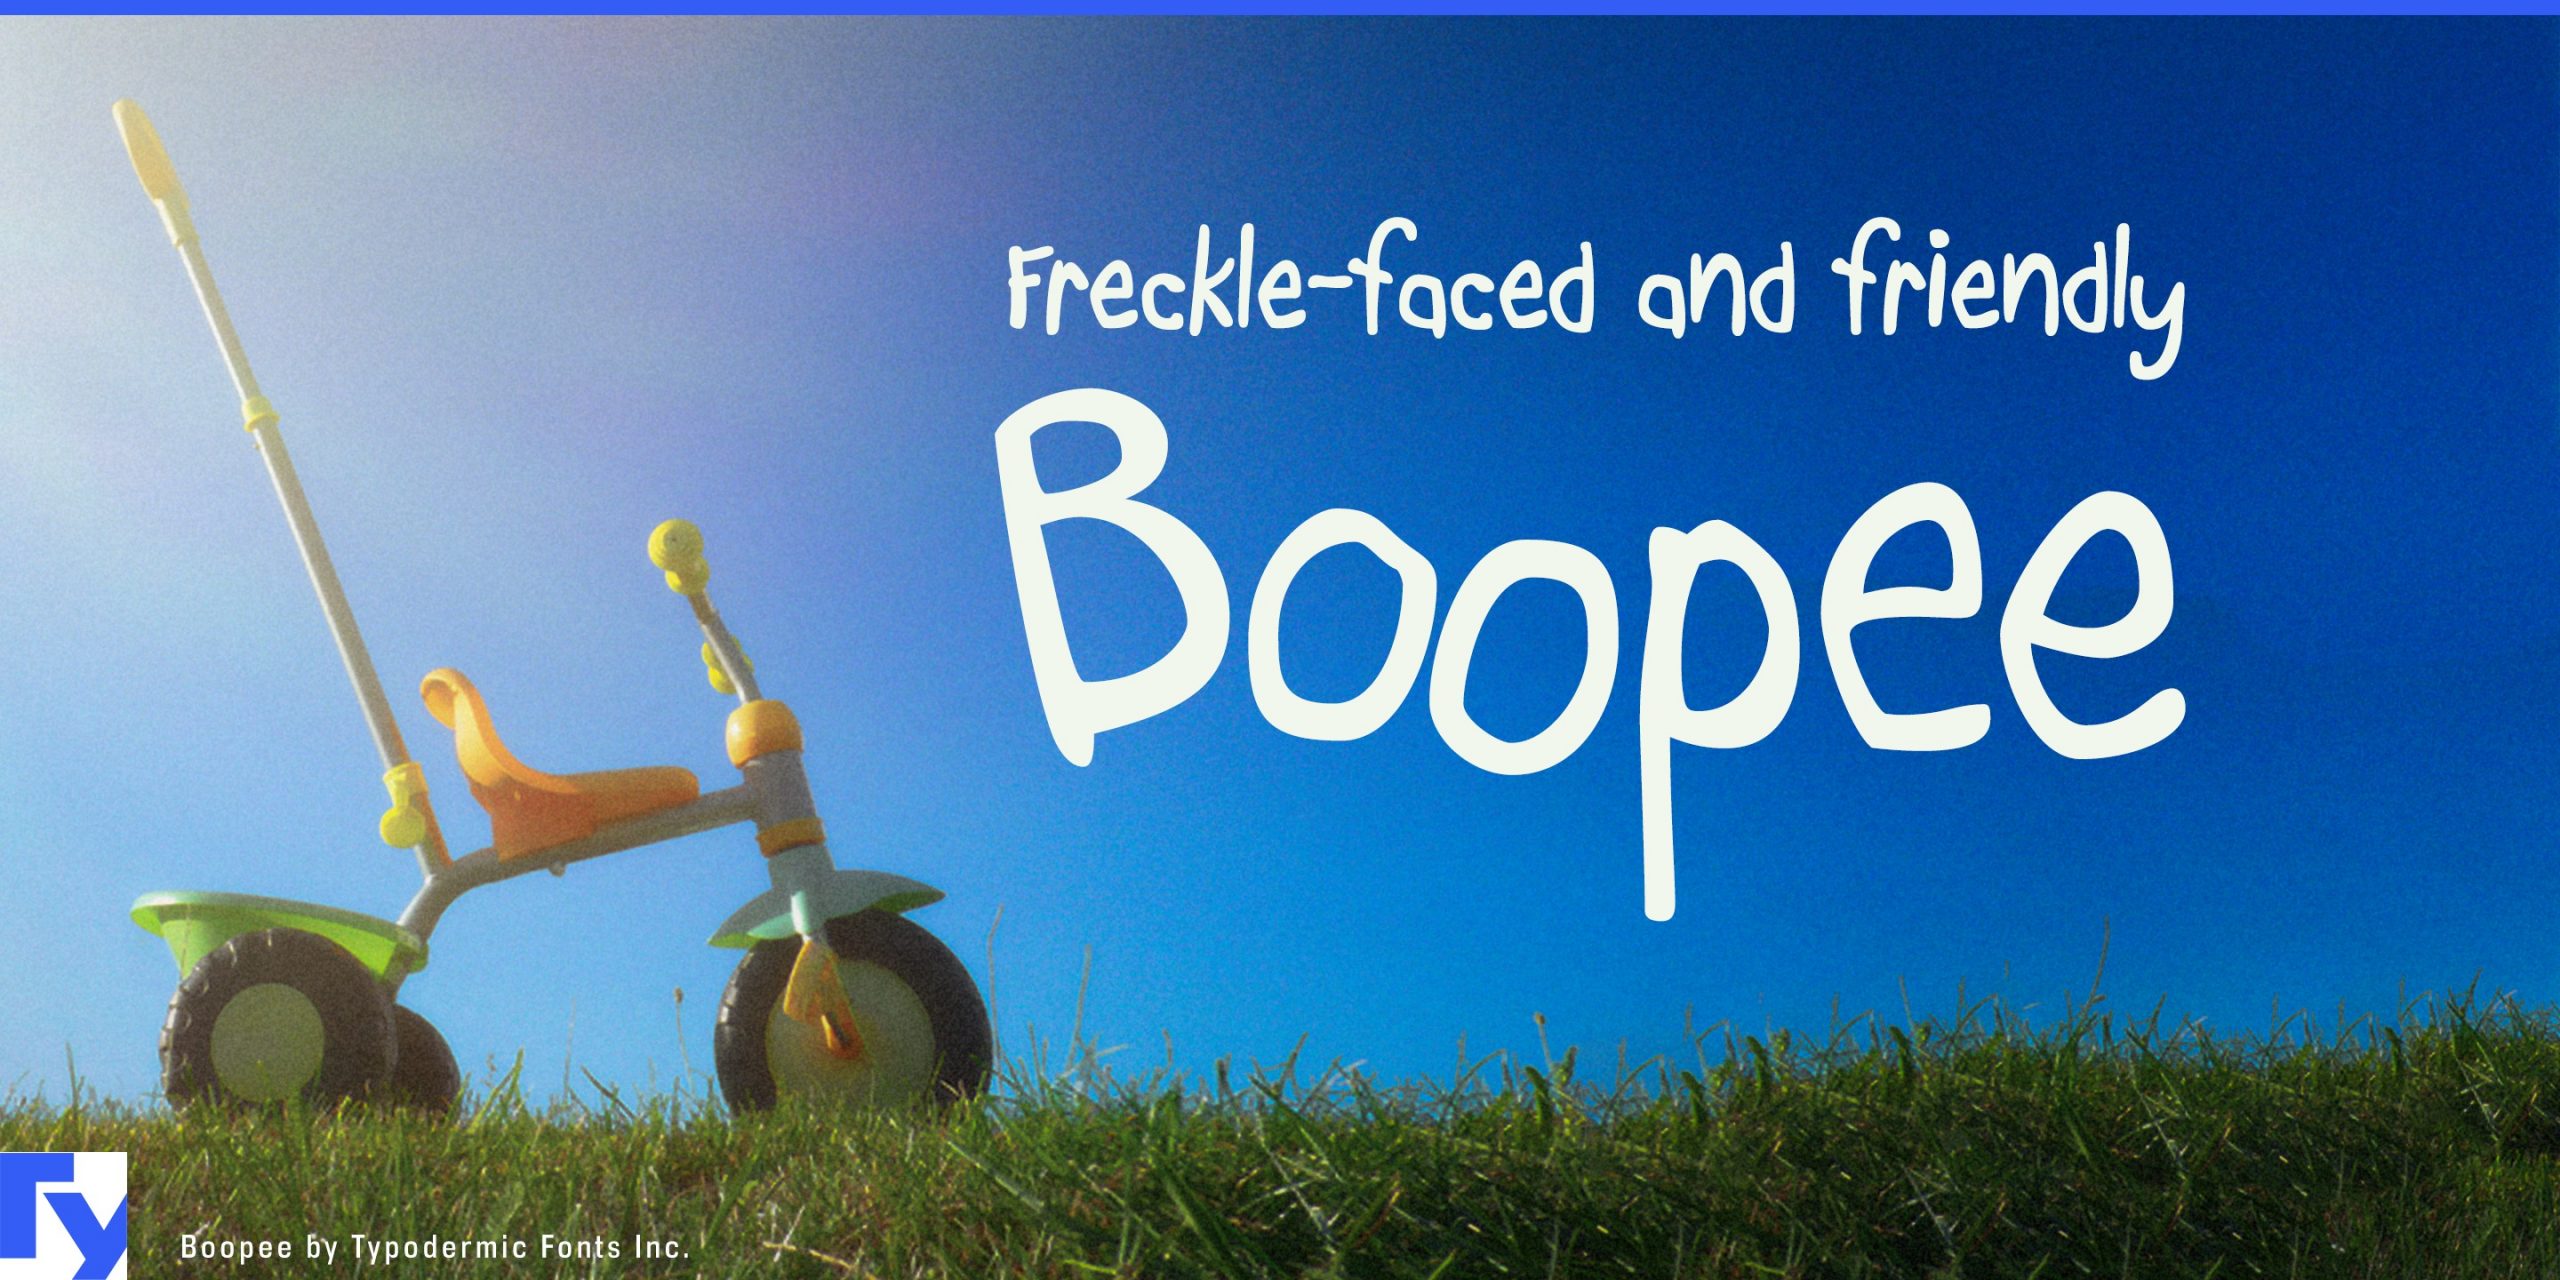 Easy to Read, Messy by Design: Unleash the Playfulness of Boopee